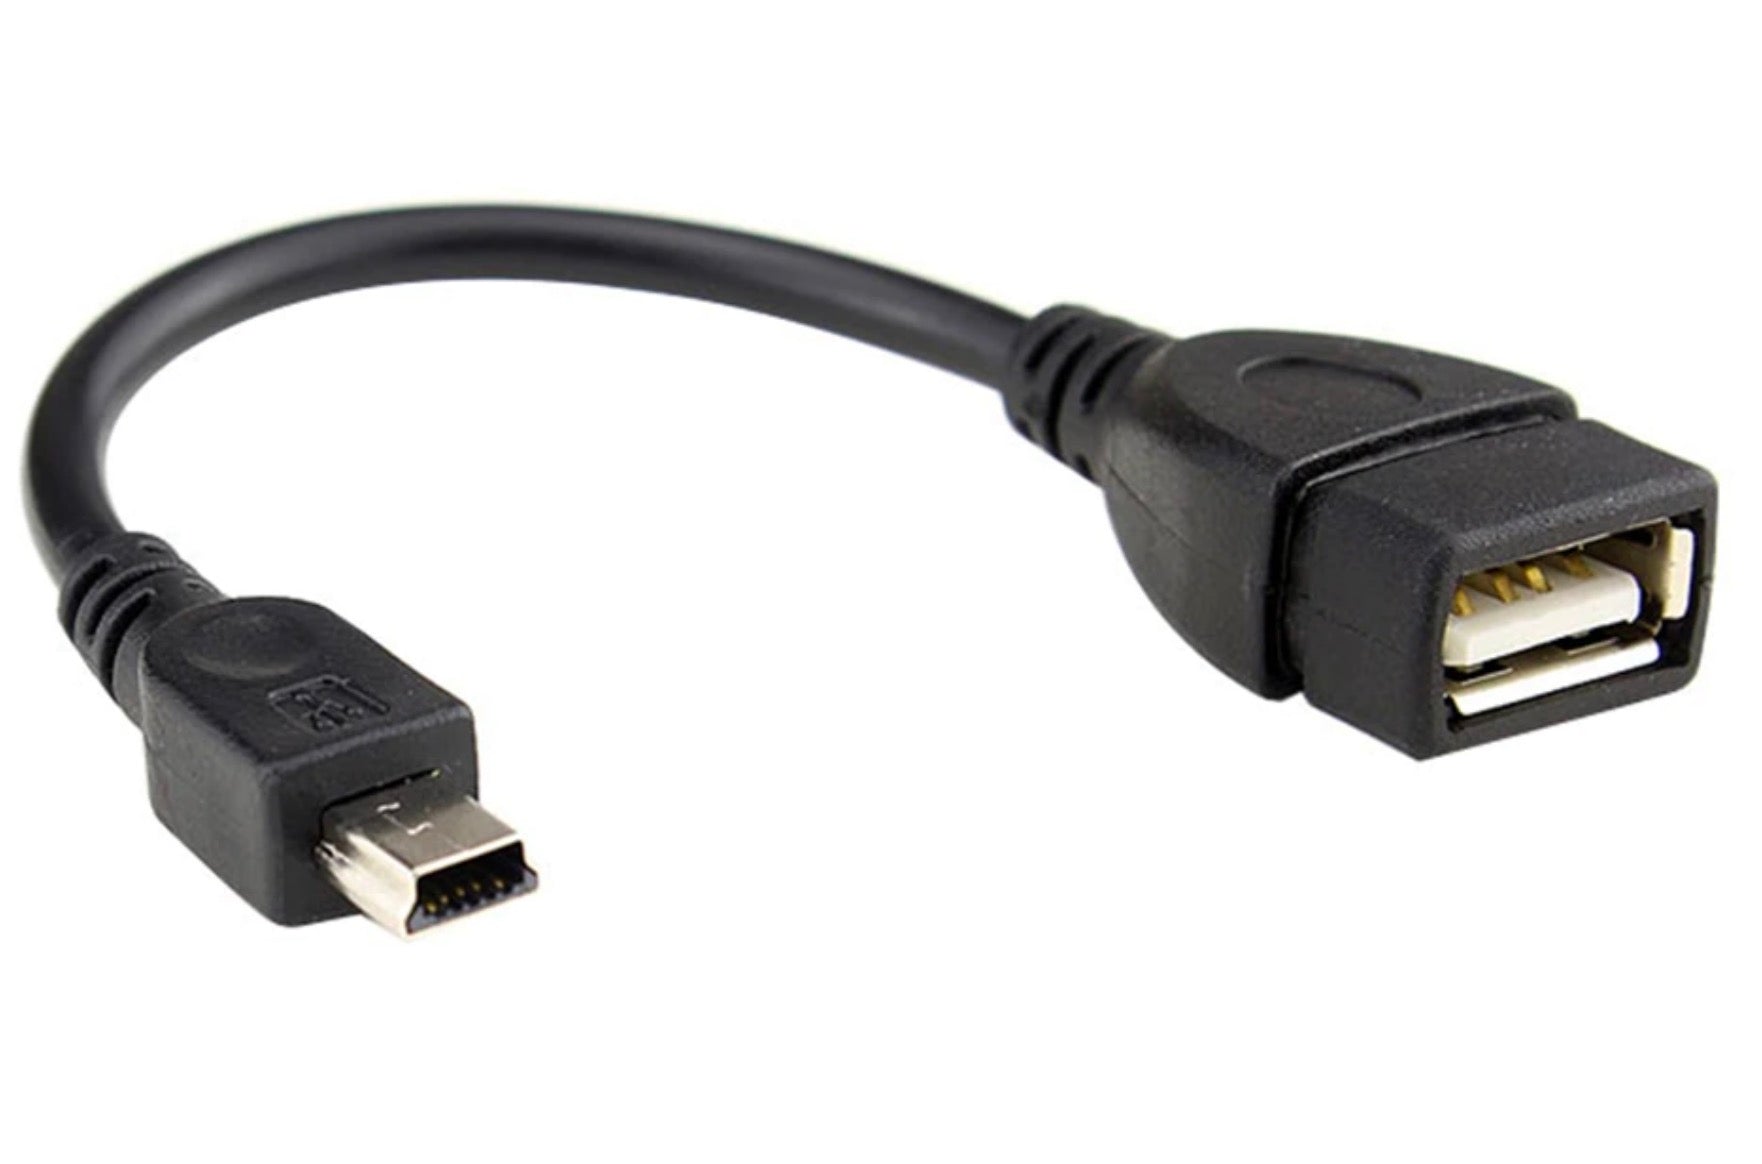 USB-A 2.0 Female to USB-B Mini 5 Pin Male OTG Adapter Cable 0.15m